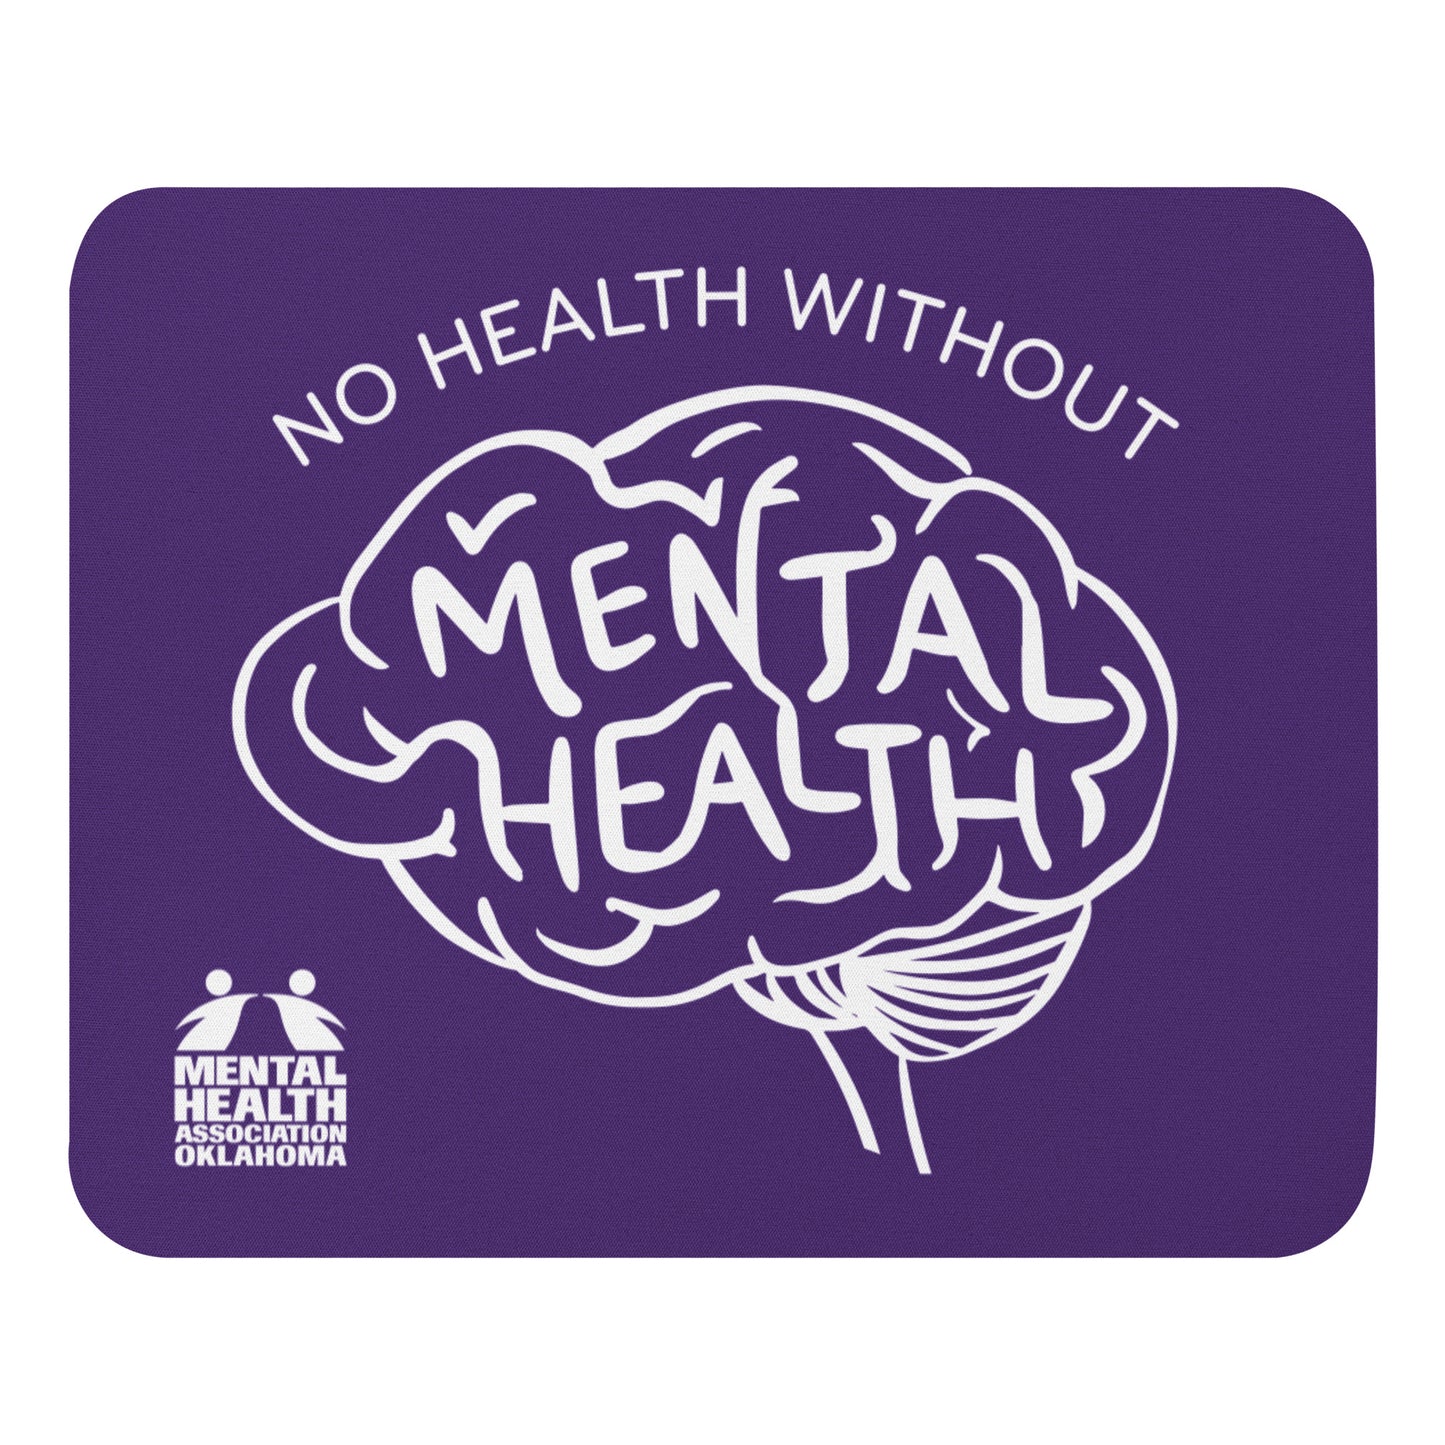 No Health Without Mental Health mouse pad